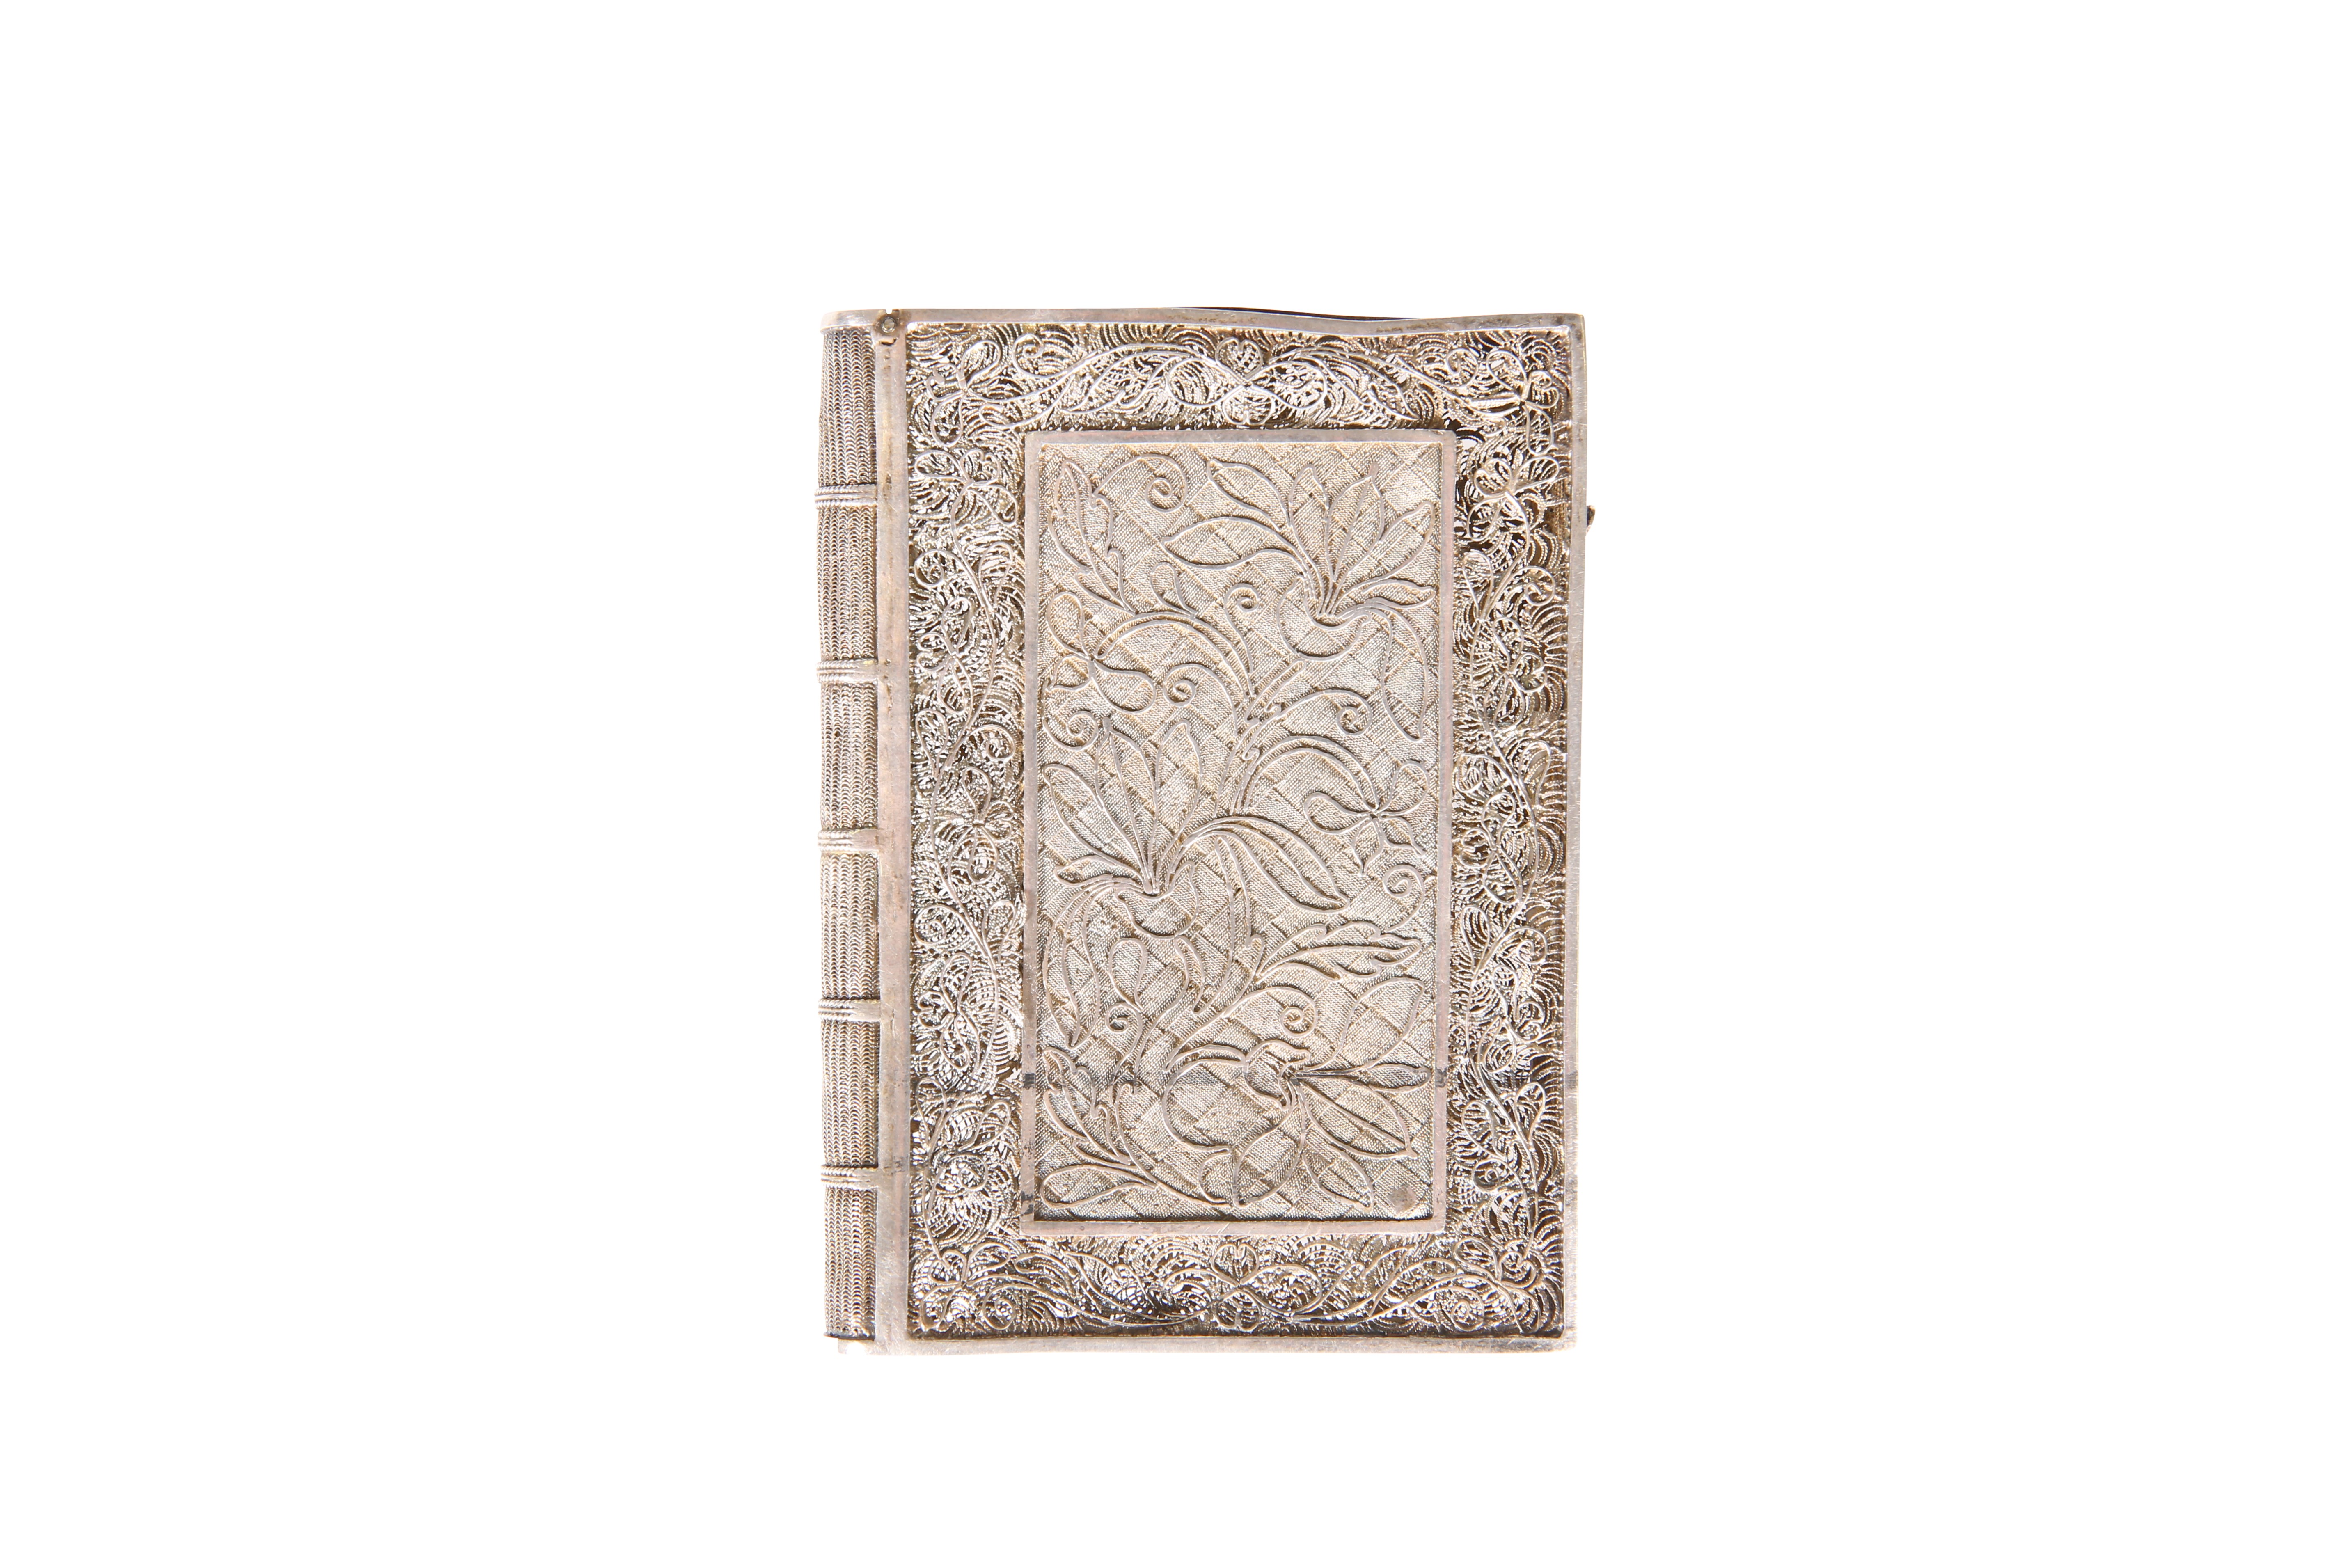 A CHINESE SILVER FILIGREE CARD CASE, c.1900